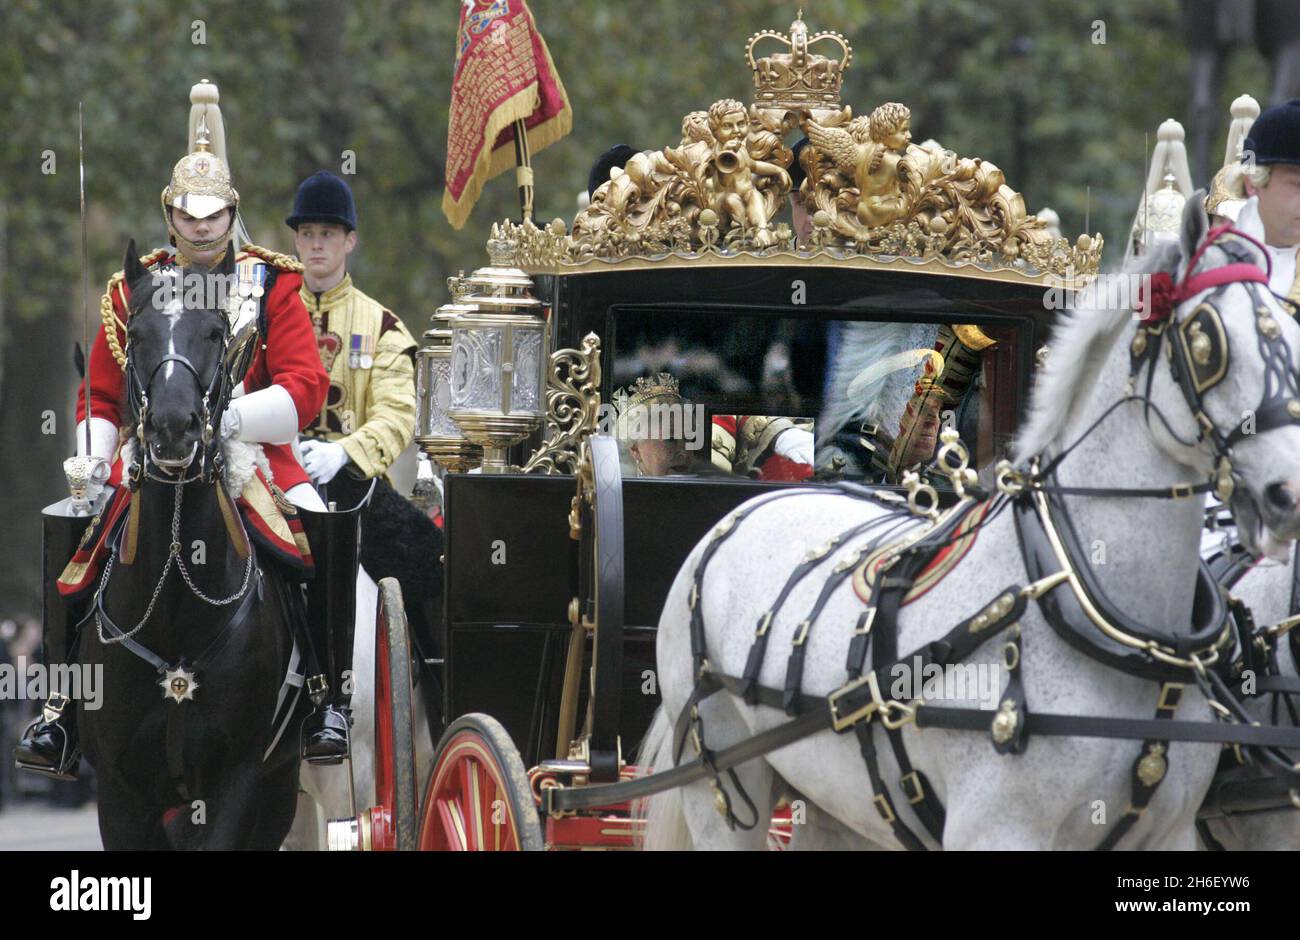 The Queen and The Duke Of Edinburgh arrive by carriage for The State Opening Of Parliament in Westminster on November 15, 2006 in London. Jeff Moore/EMPICS Entertainment  Stock Photo